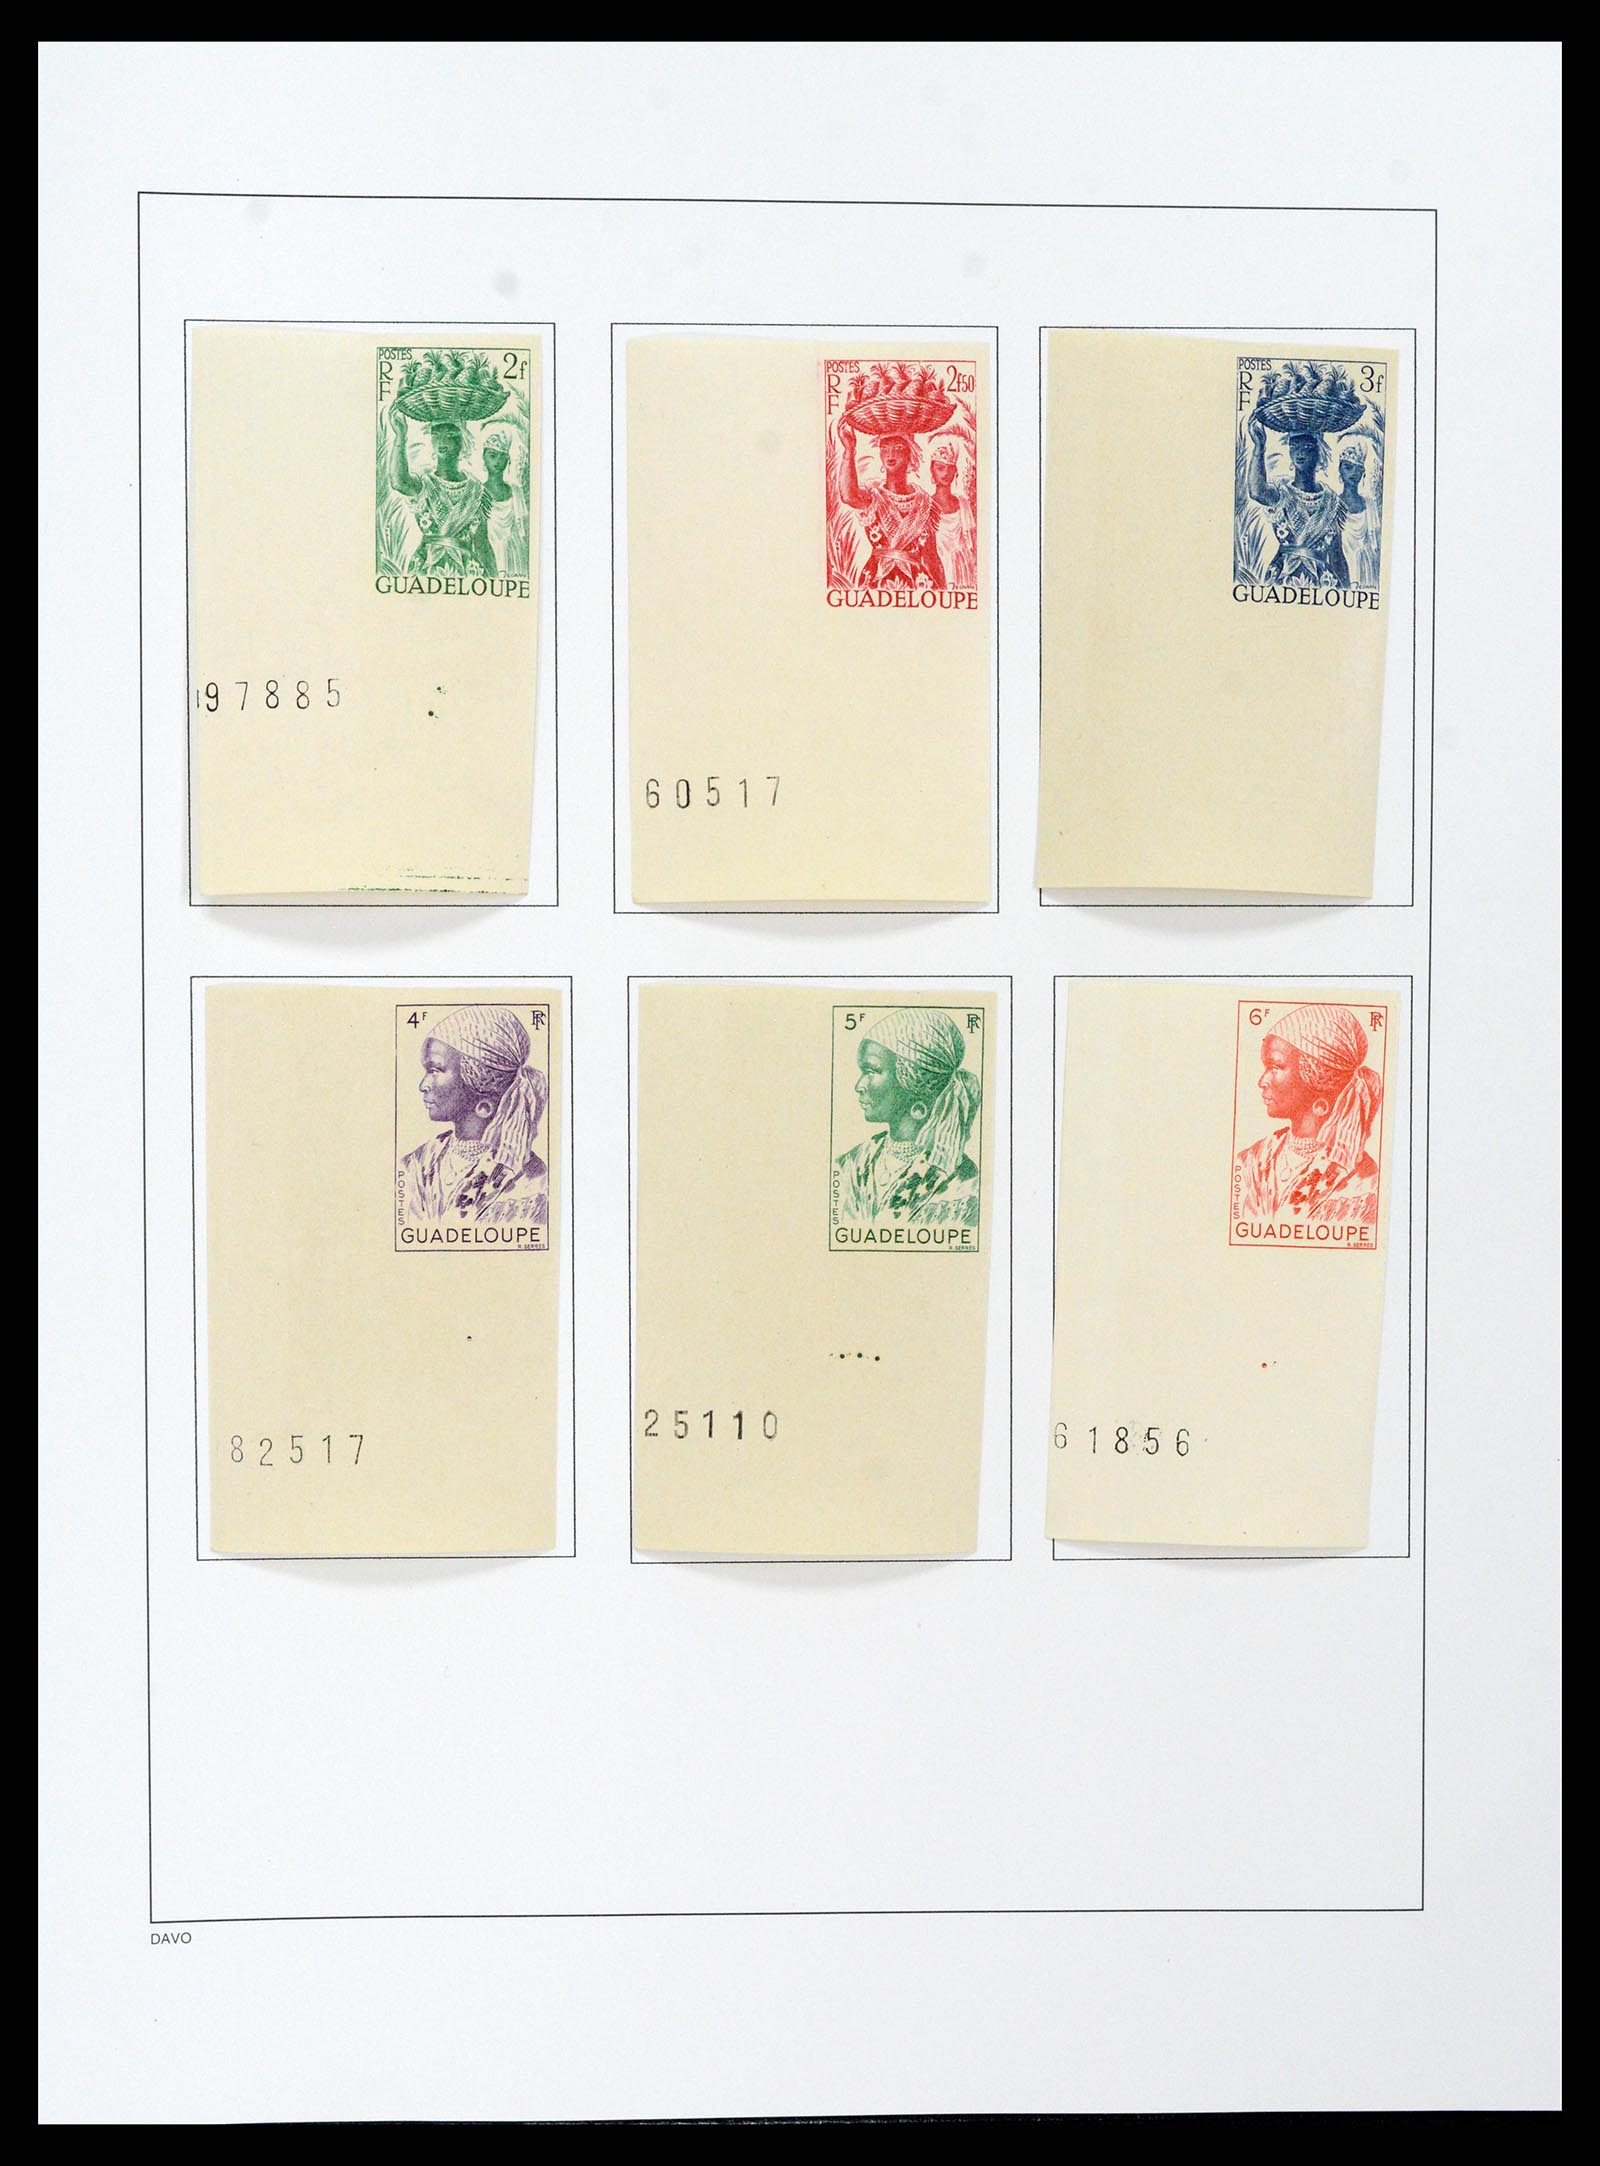 37480 082 - Stamp collection 37480 Guadeloupe supercollection 1823-1947.